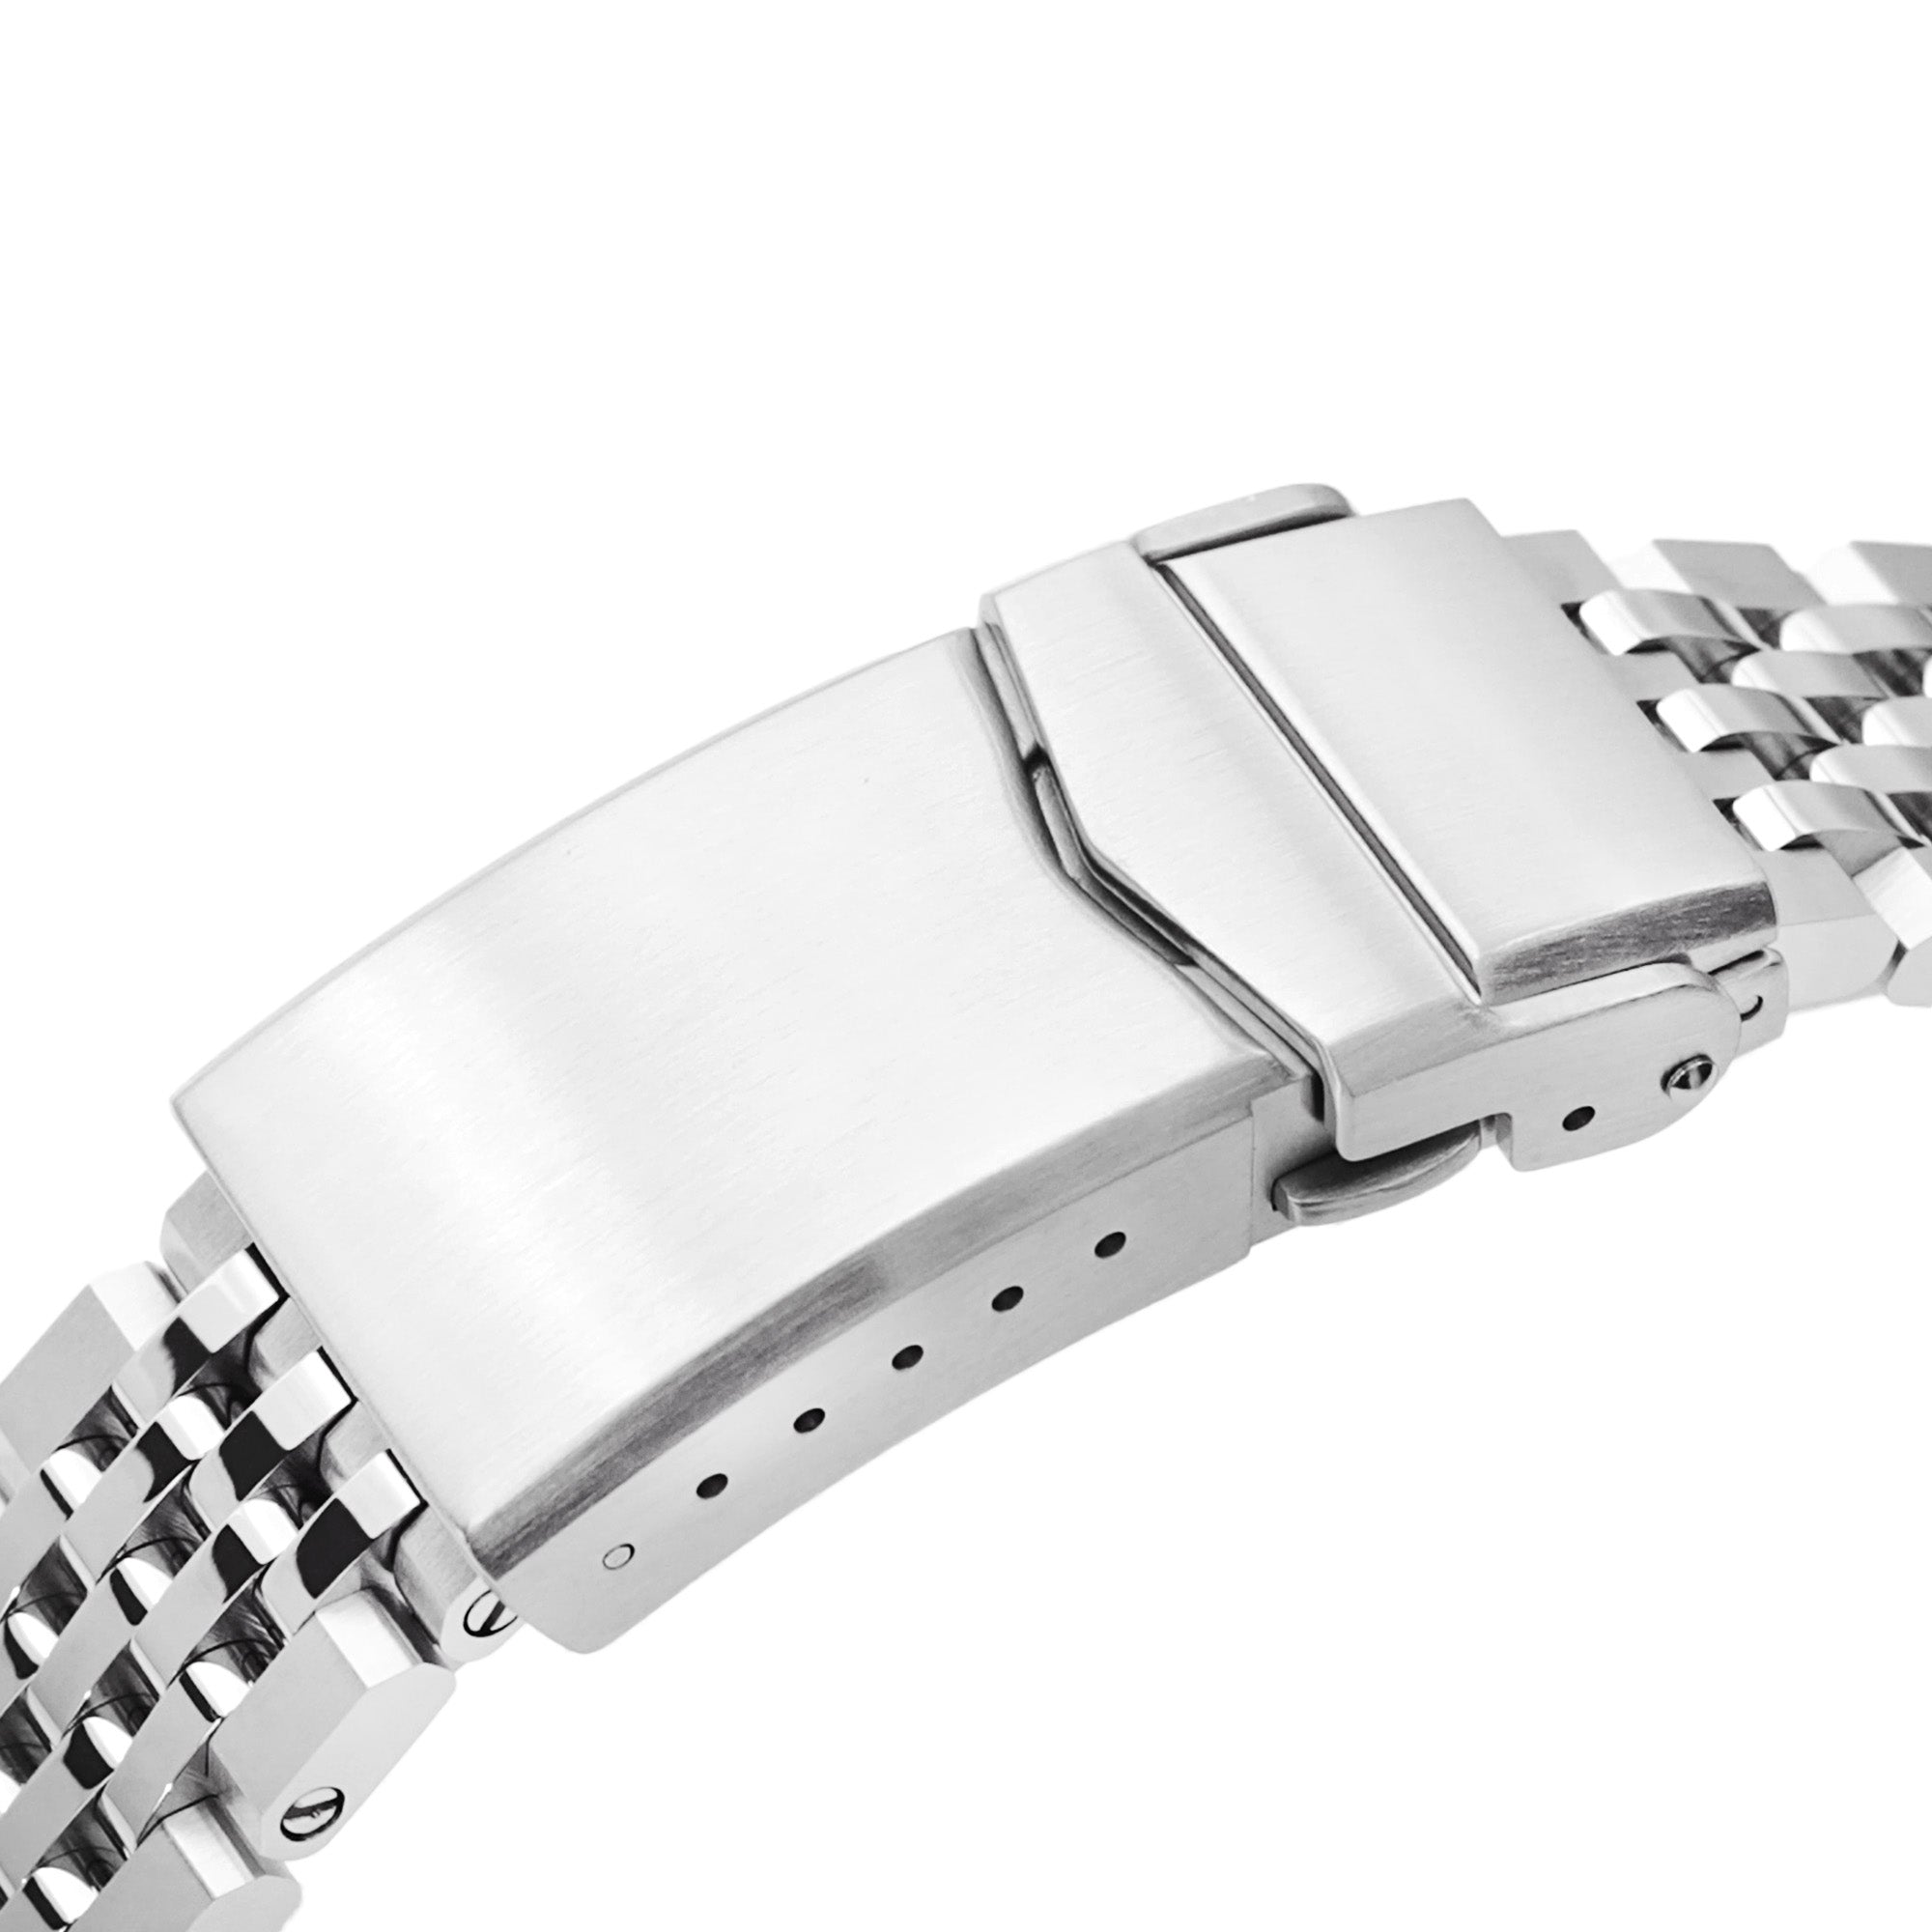 20mm Asteroid Watch Band for Seiko Alpinist SARB017, 316L Stainless Steel Brushed and Polished V-Clasp Strapcode Watch Bands